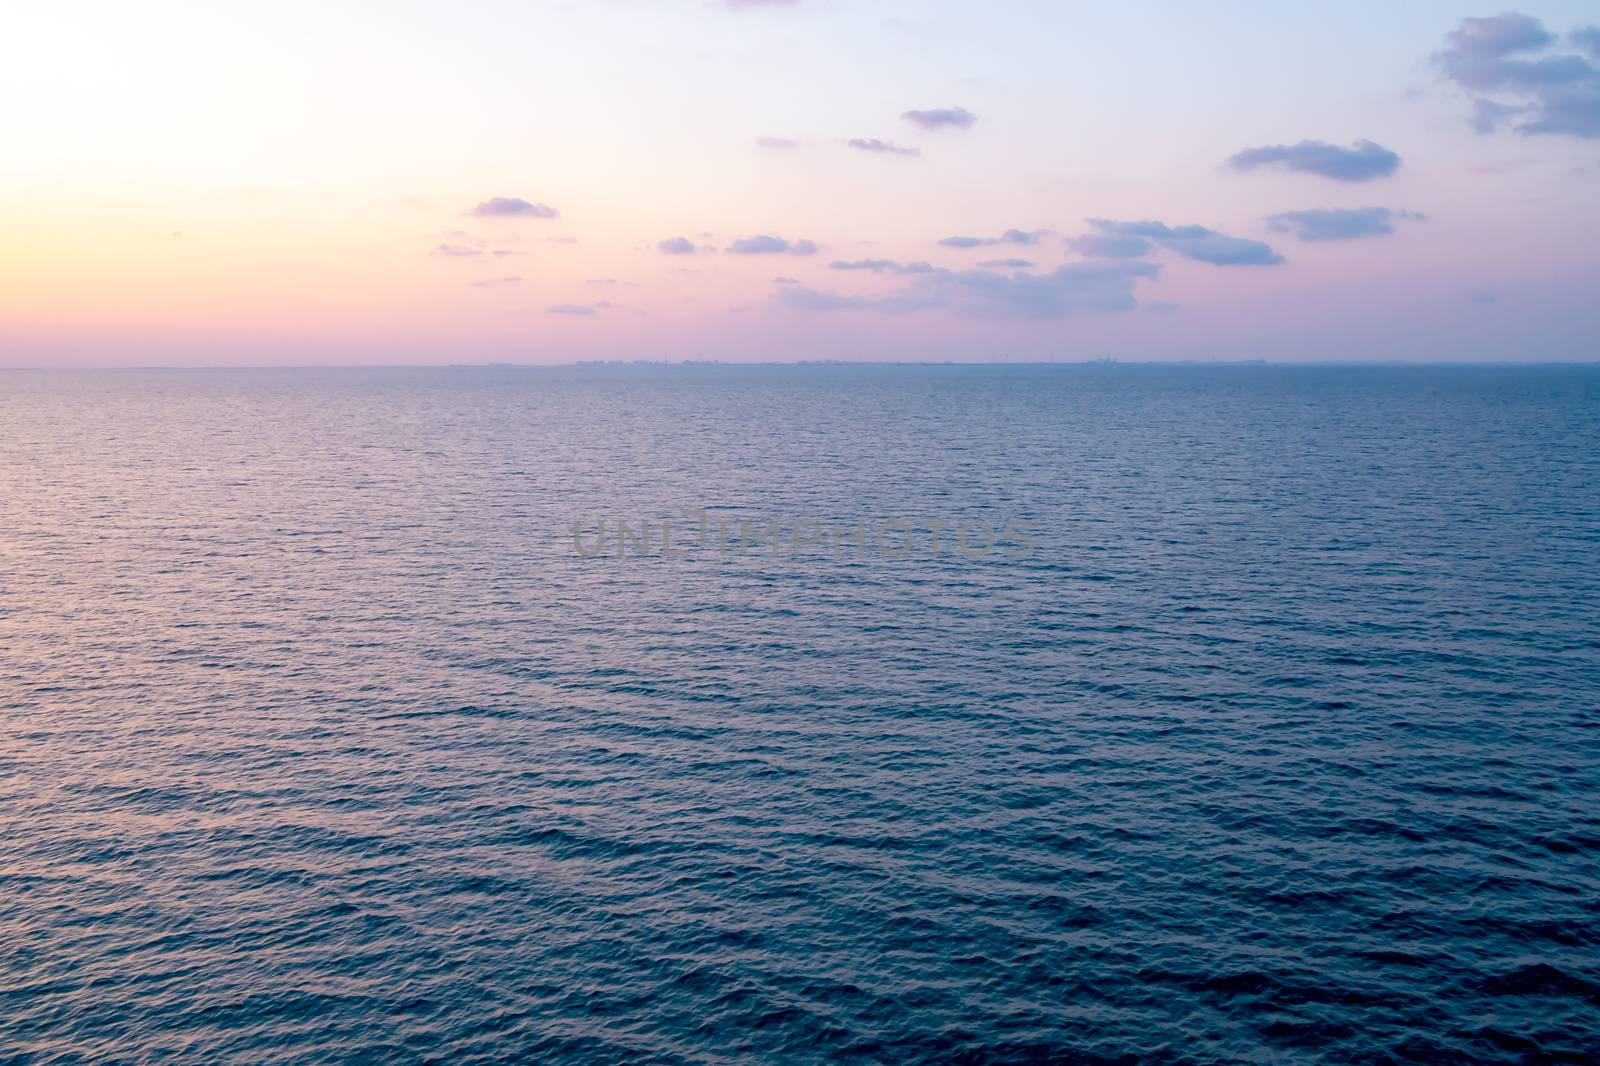 Colorful sunrise on the sea. View of the sea sunrise from the cruise ship by galsand